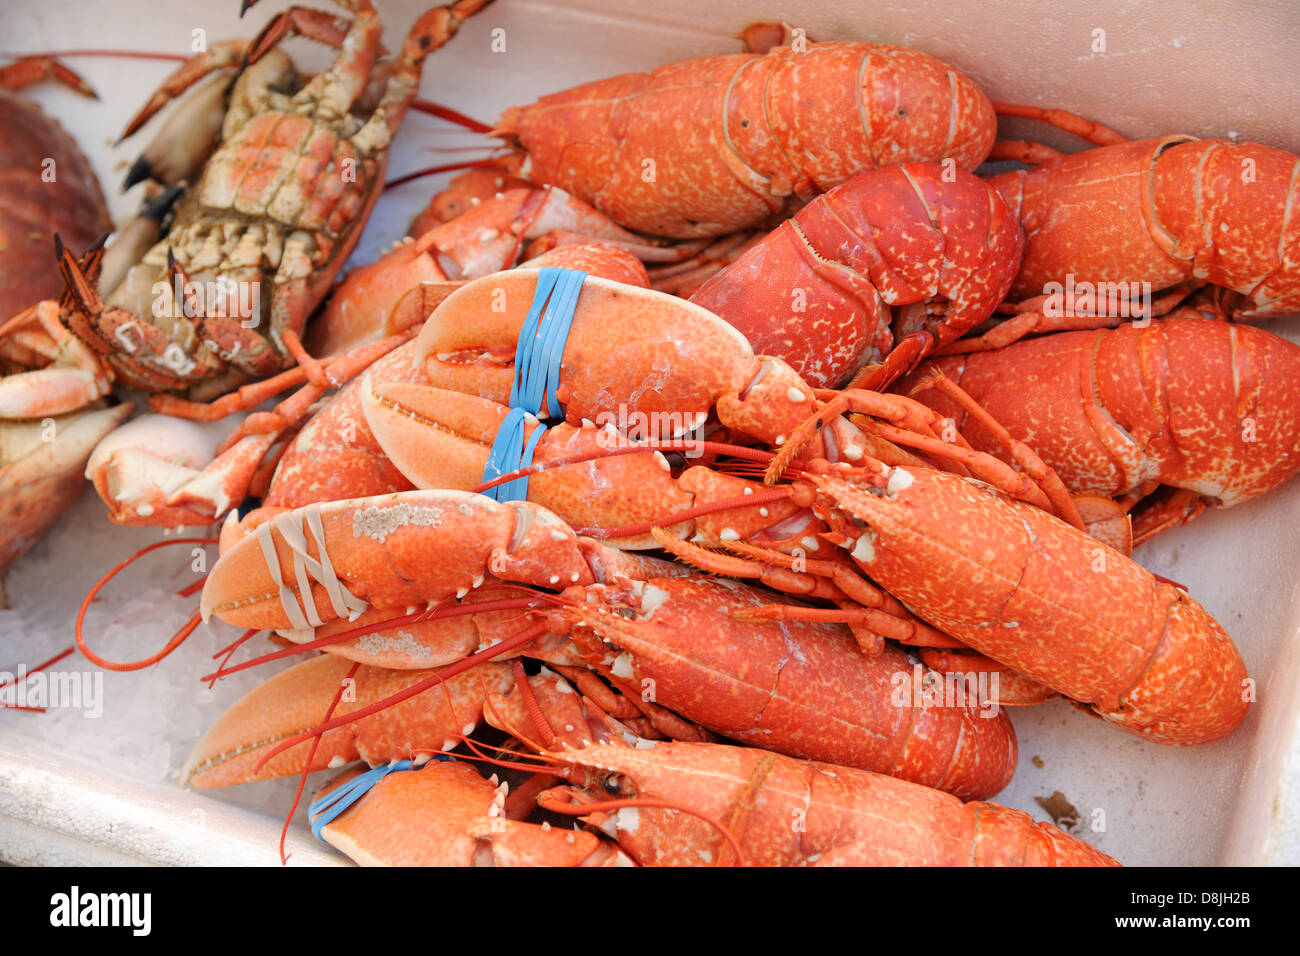 Red lobster at a fish market cooked and ready for the table. Stock Photo